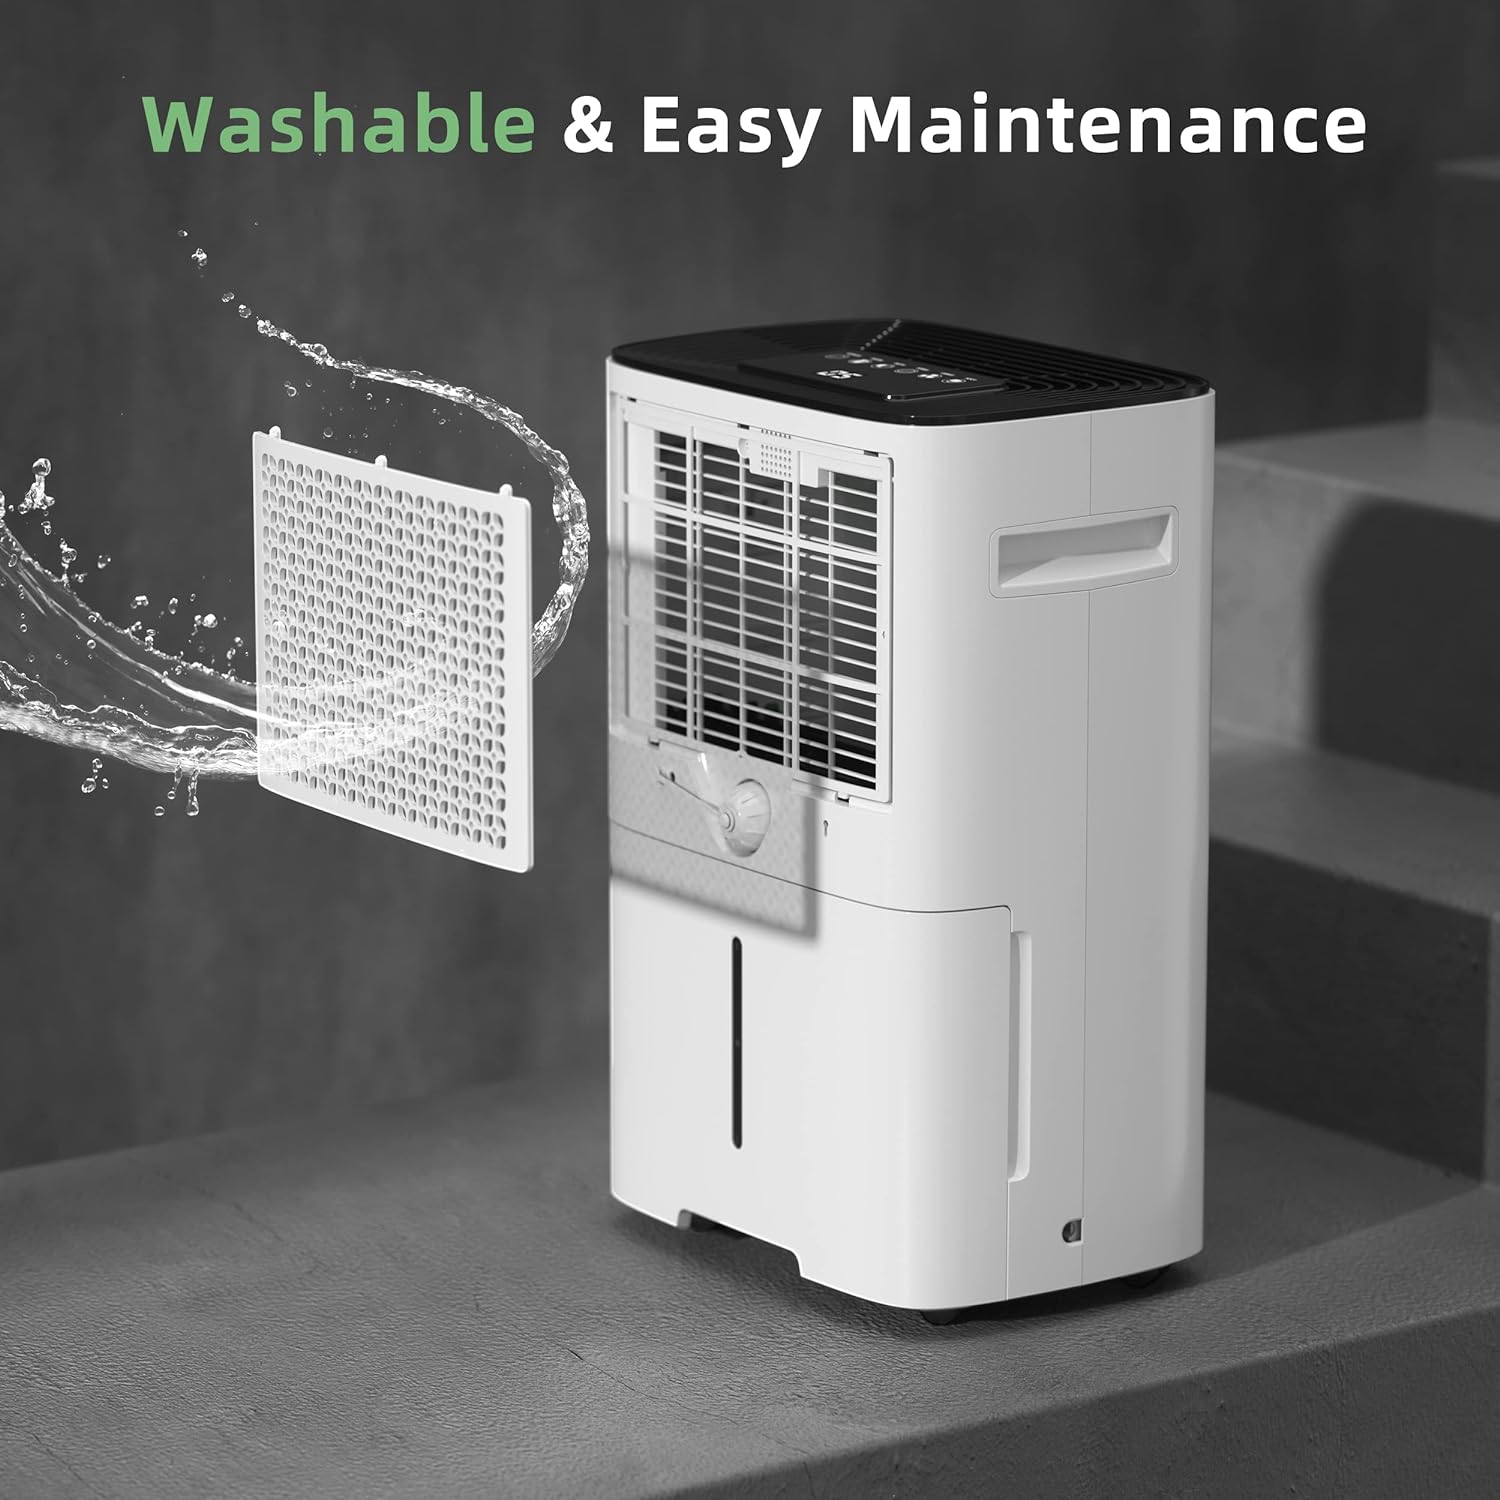 HOGARLABS 30 Pint Dehumidifiers Up to 2000 Sq Ft for Continuous Dehumidify, Home Dehumidifier with Digital Control Panel and Drain Hose for Basements, Bedroom, Bathroom. White